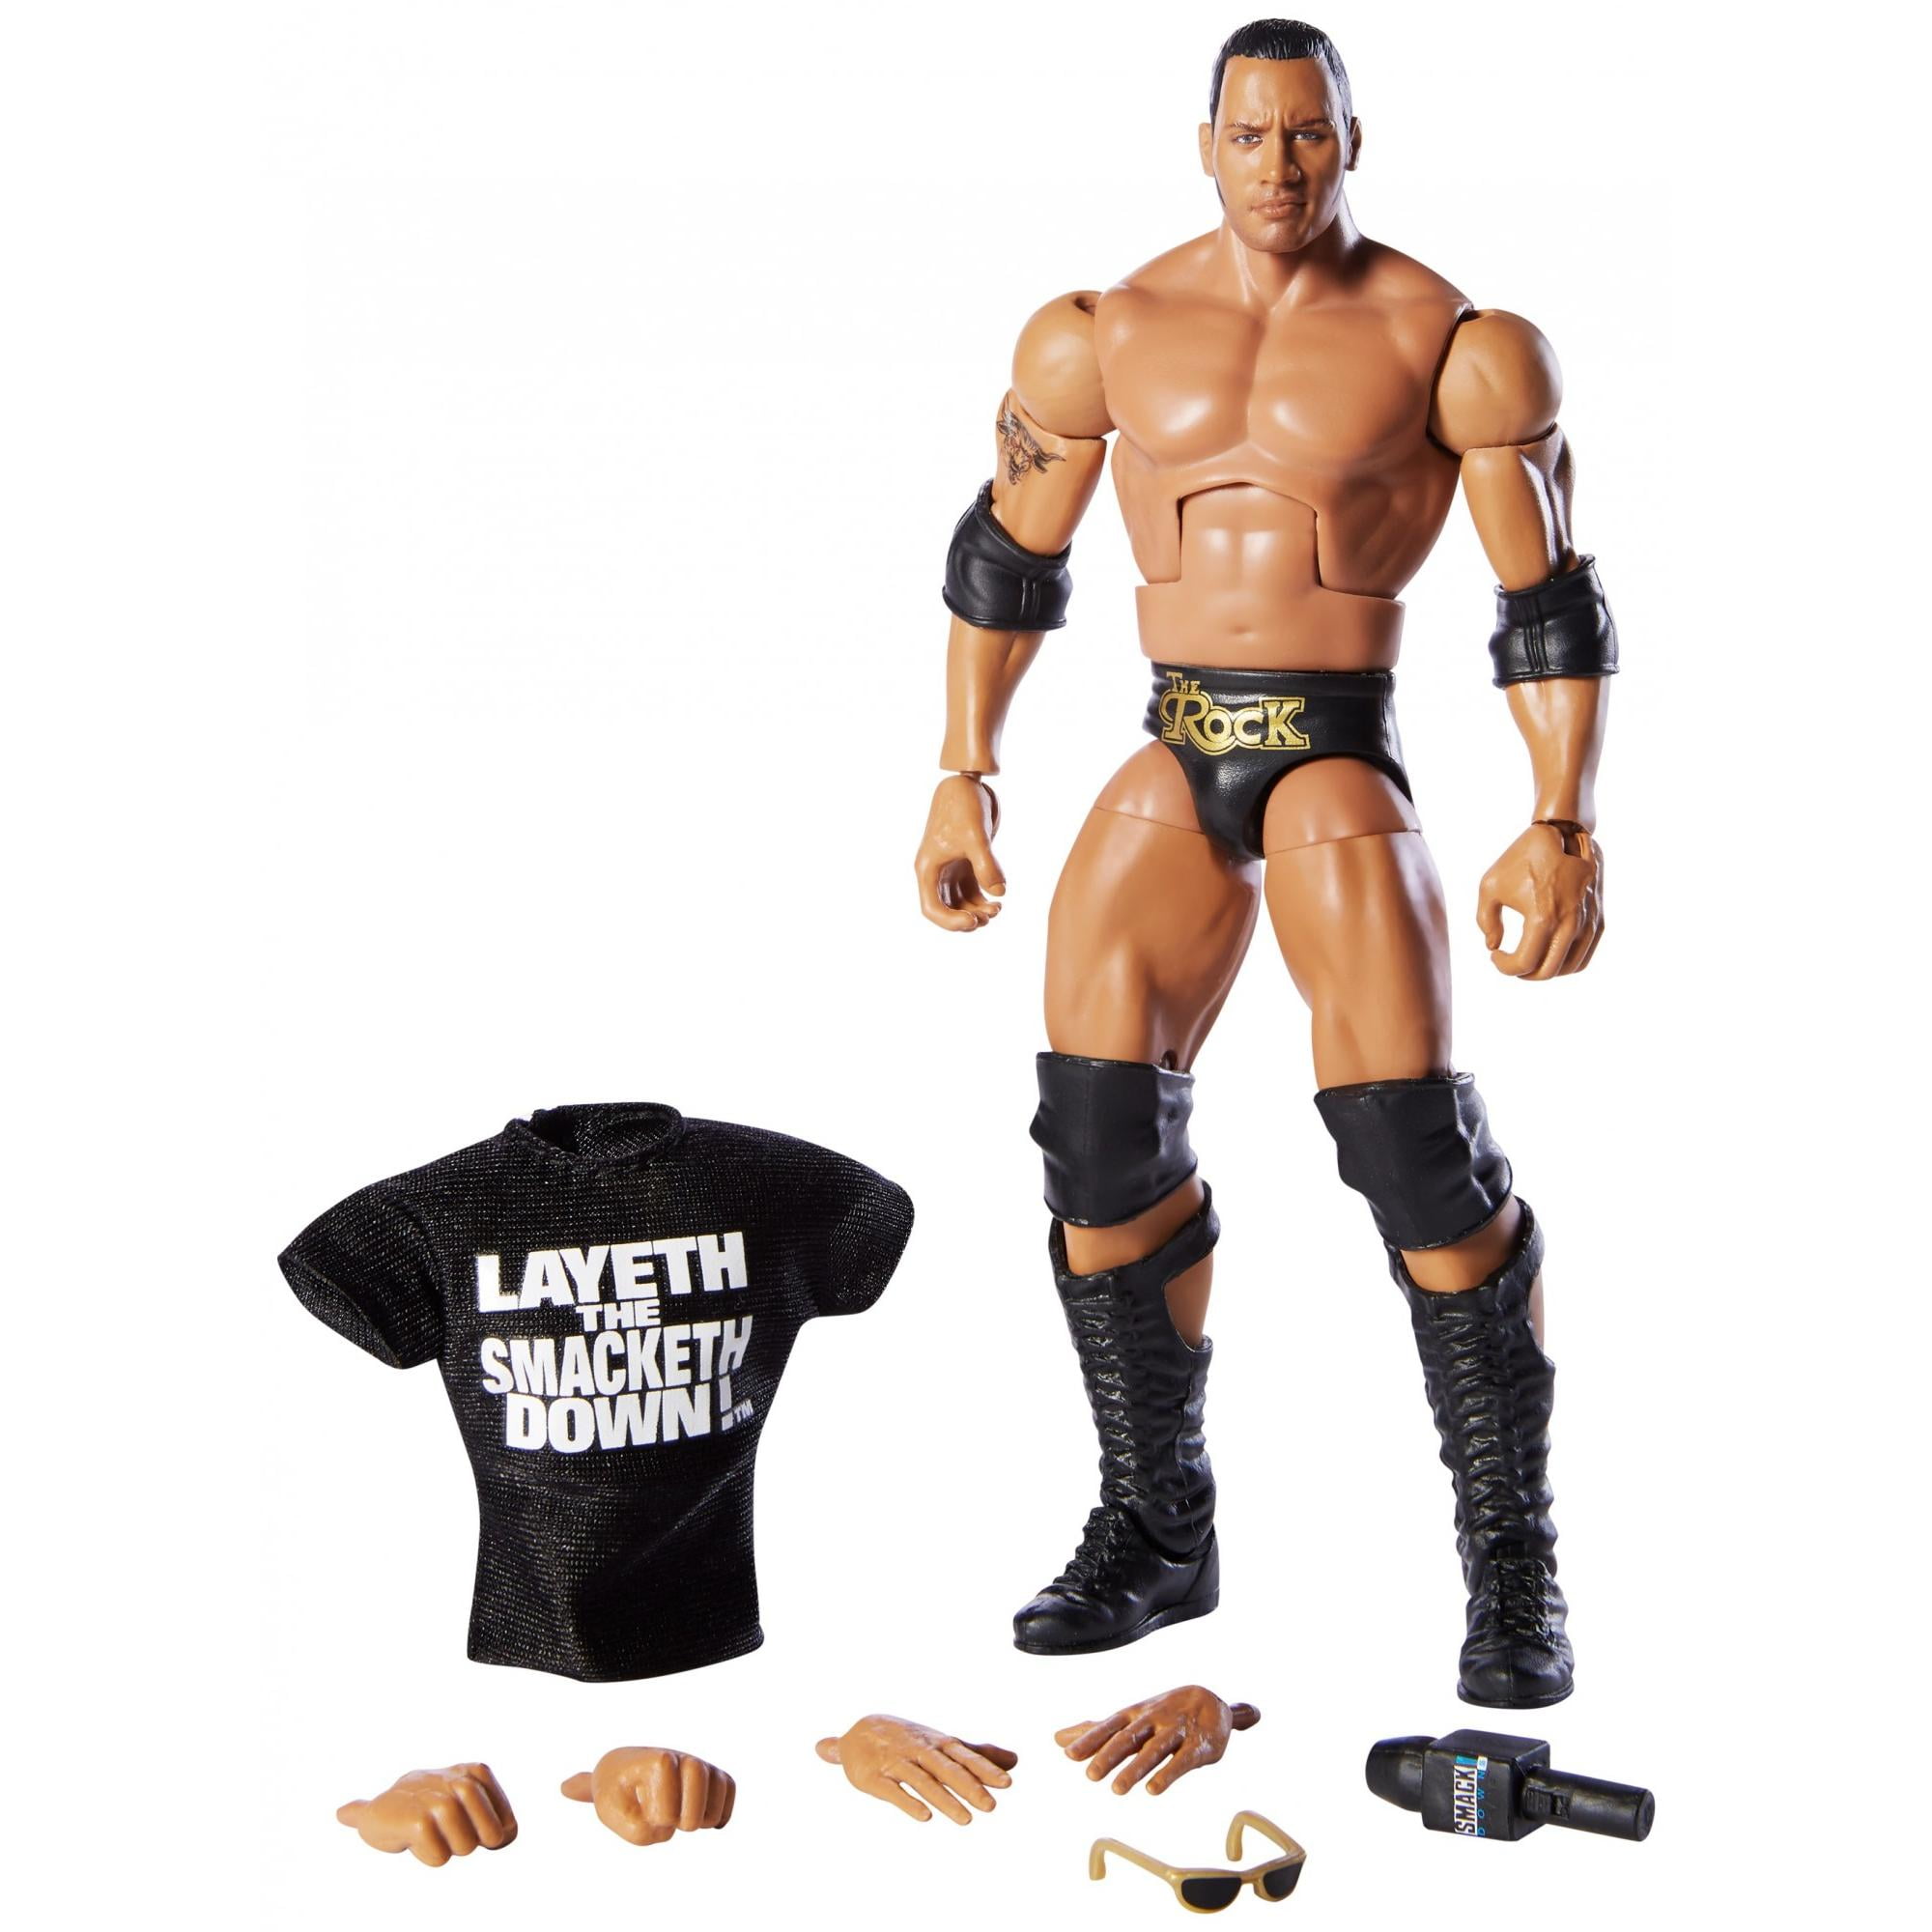 WWE Wrestling Mini Action Figure The Rock New Collectible 3 Inch